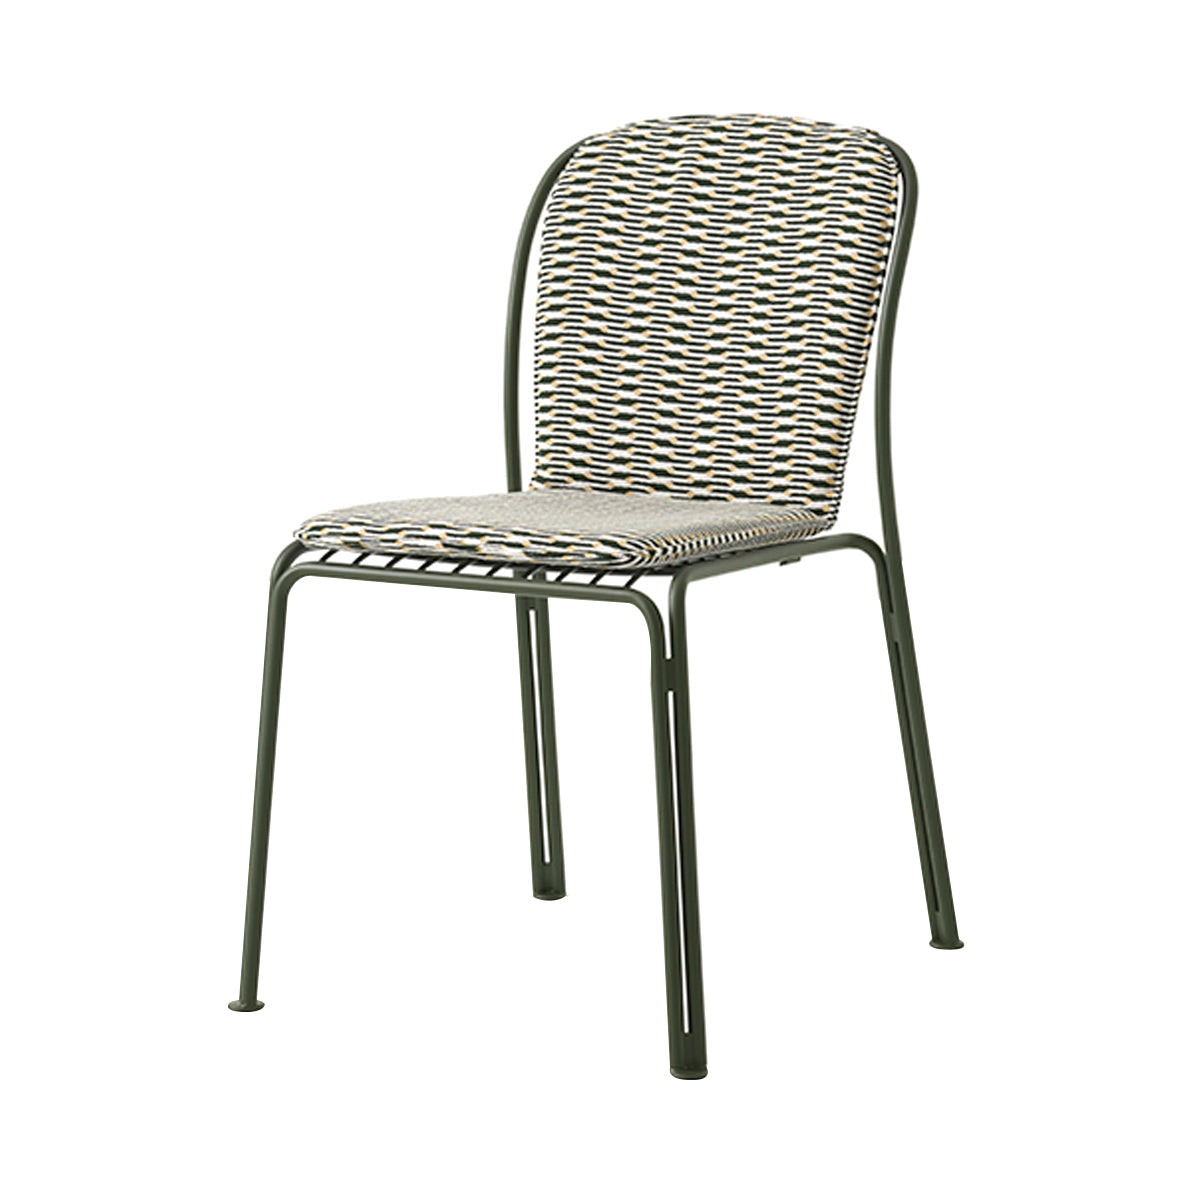 Thorvald SC94 Side Chair: Outdoor + Bronze Green + With Marquetry Bora Cushion